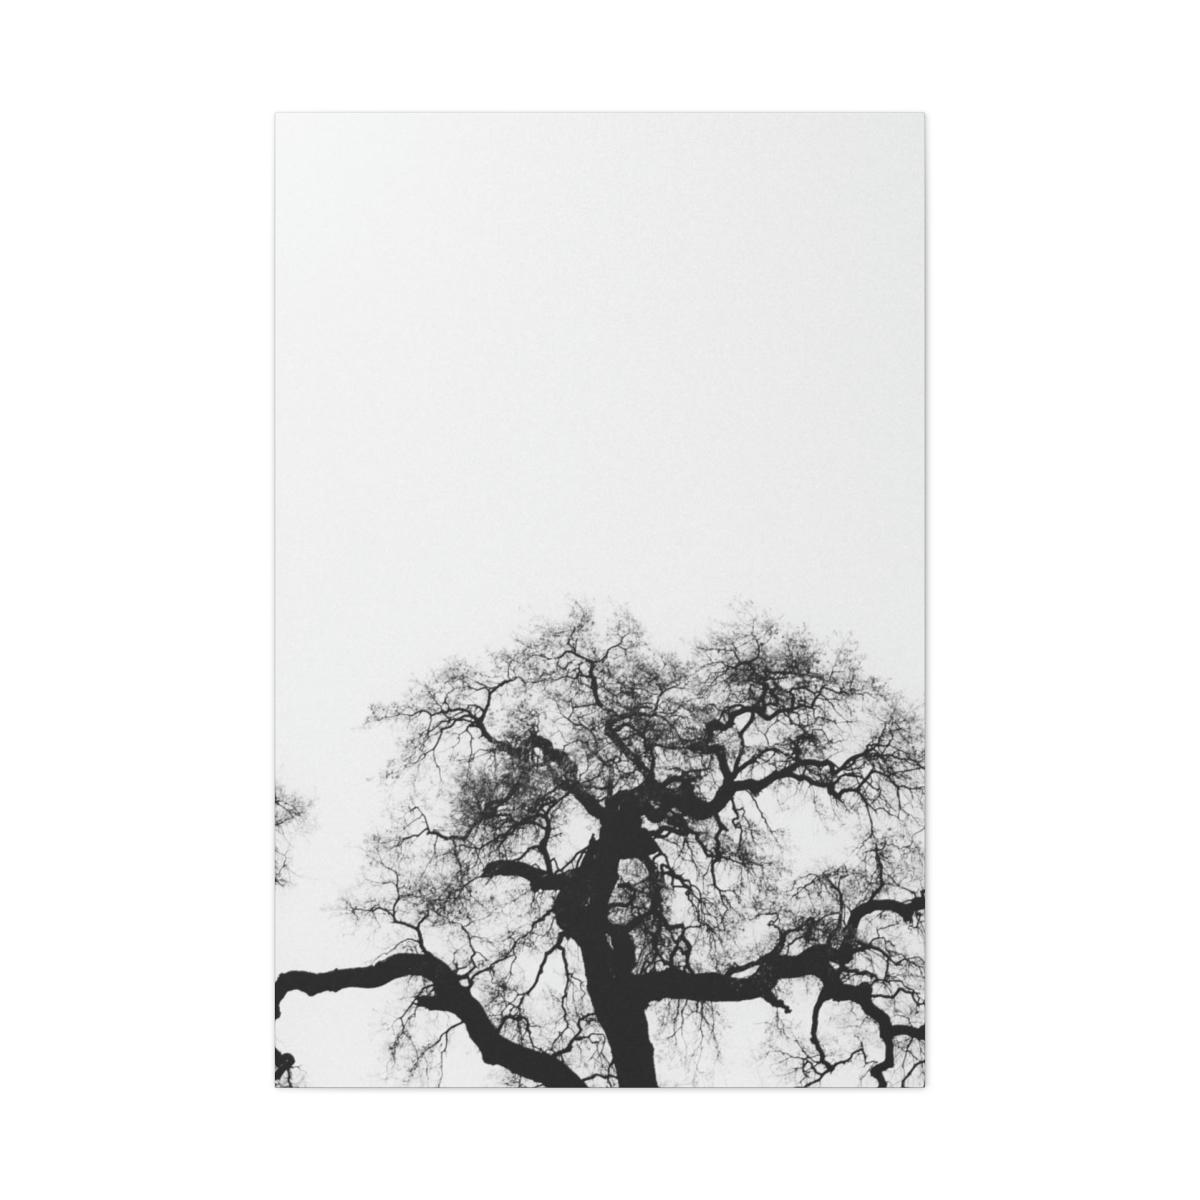 Image of a bare tree